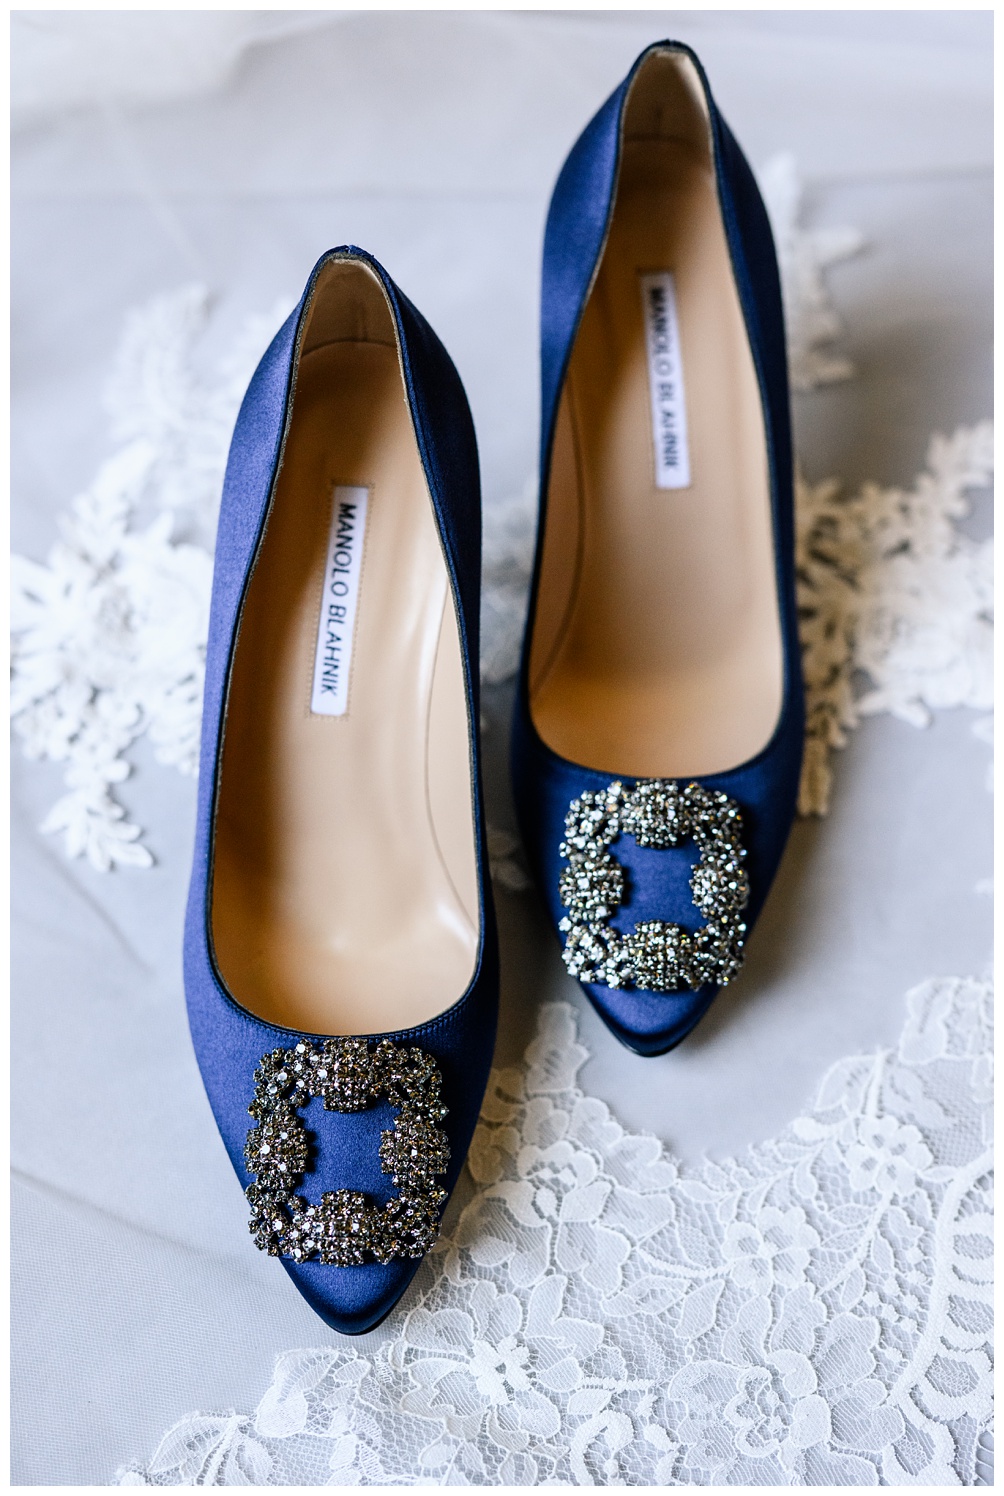 The most iconic wedding heels of all time Manolo Blahnik Hangisi in blue satin